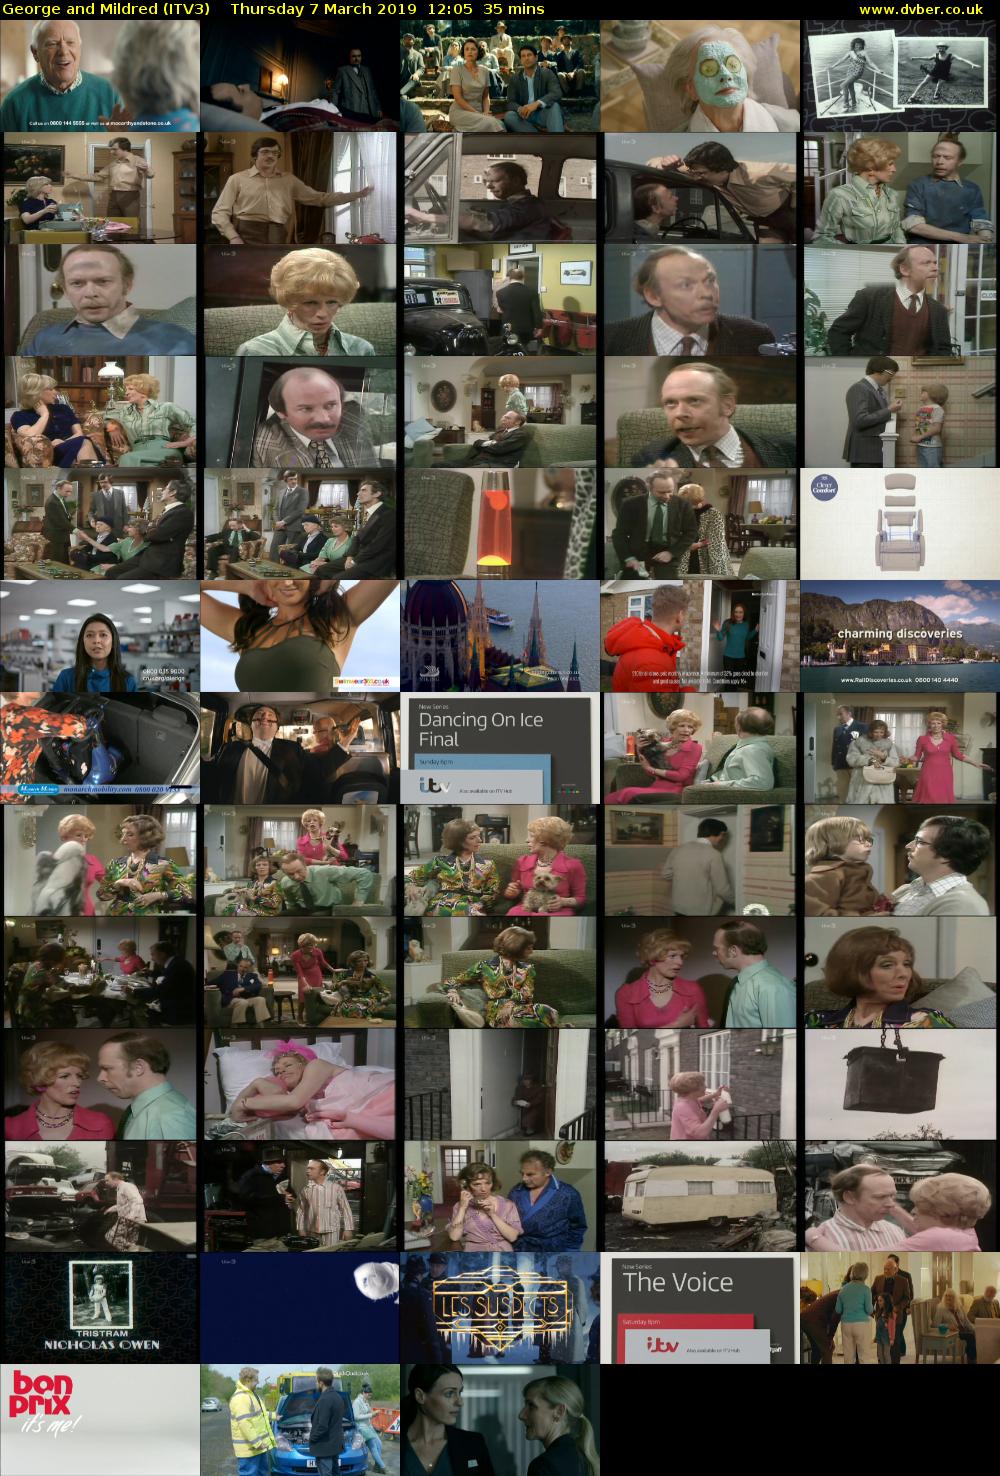 George and Mildred (ITV3) Thursday 7 March 2019 12:05 - 12:40